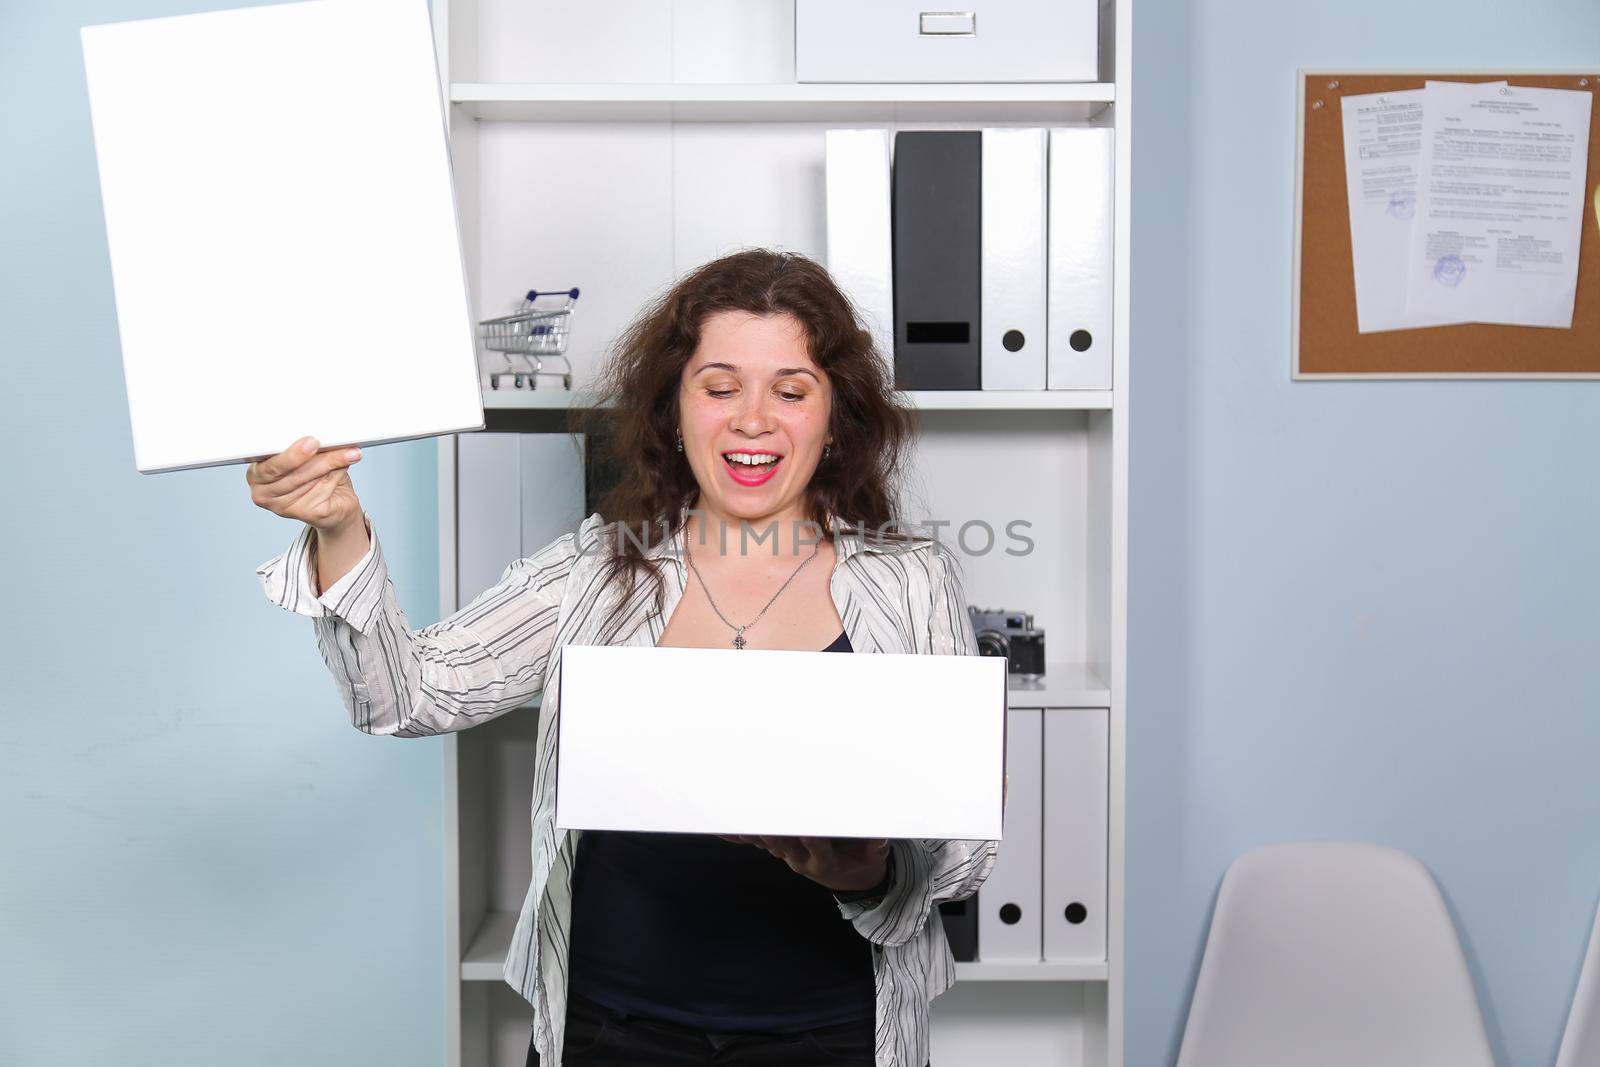 Concept of dismissal from work. Happy woman with carton box with her stationery stuff, girl was fired from her job